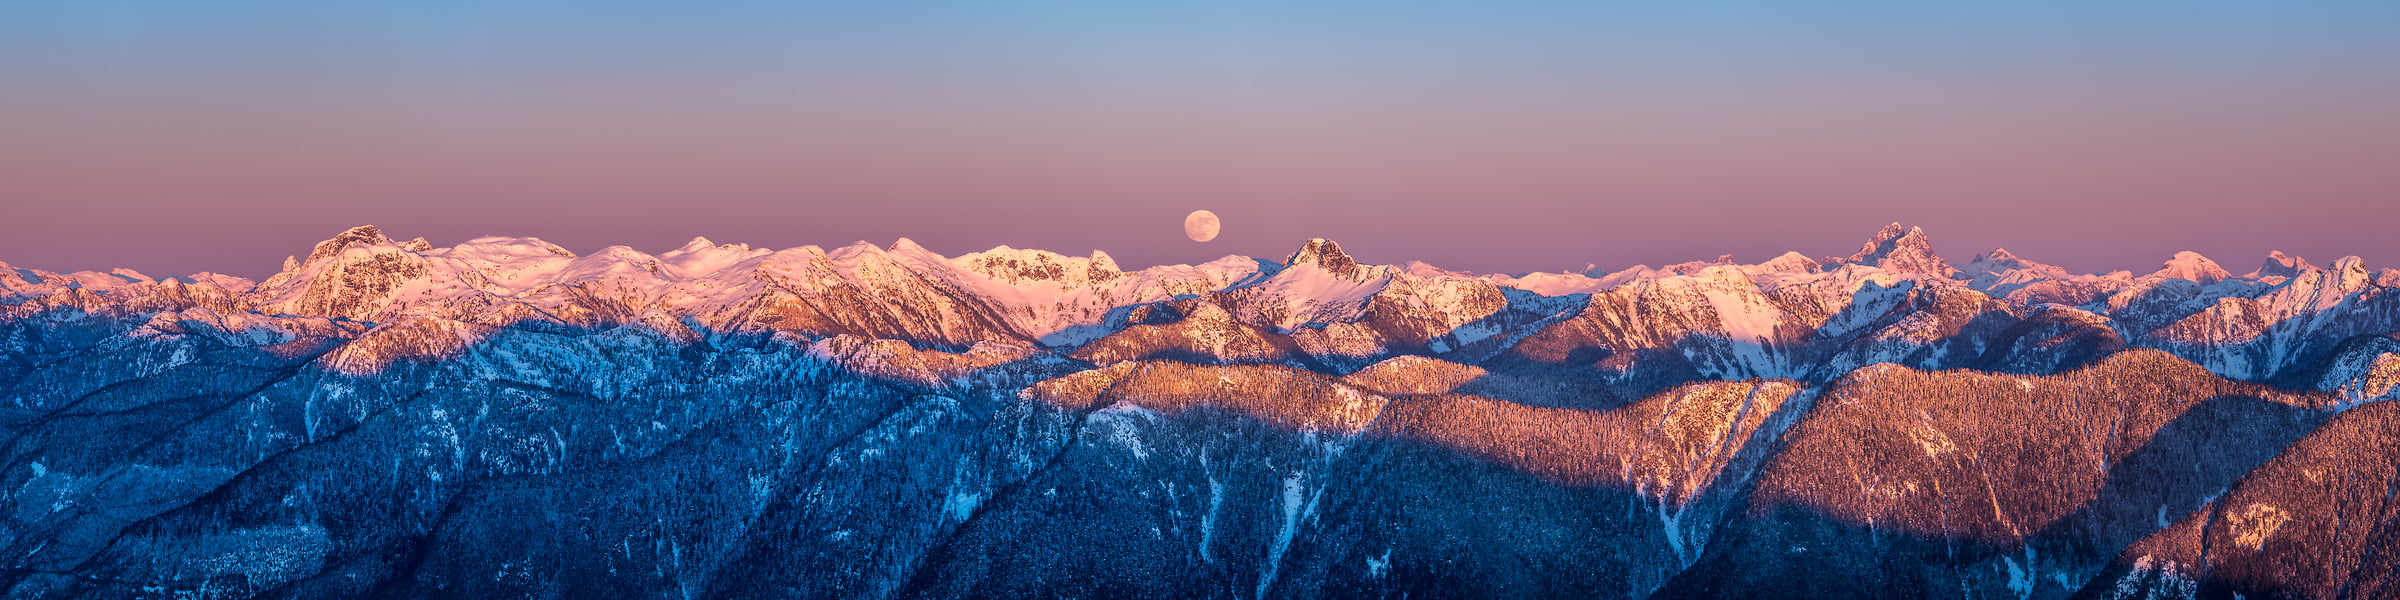 169 megapixels! A very high resolution, large-format VAST photo print of mountains, sunset, dusk, the moon, First Peak, and Mount Seymour Provincial Park; fine art landscape photo created by Tim Shields in Vancouver, British Columbia.